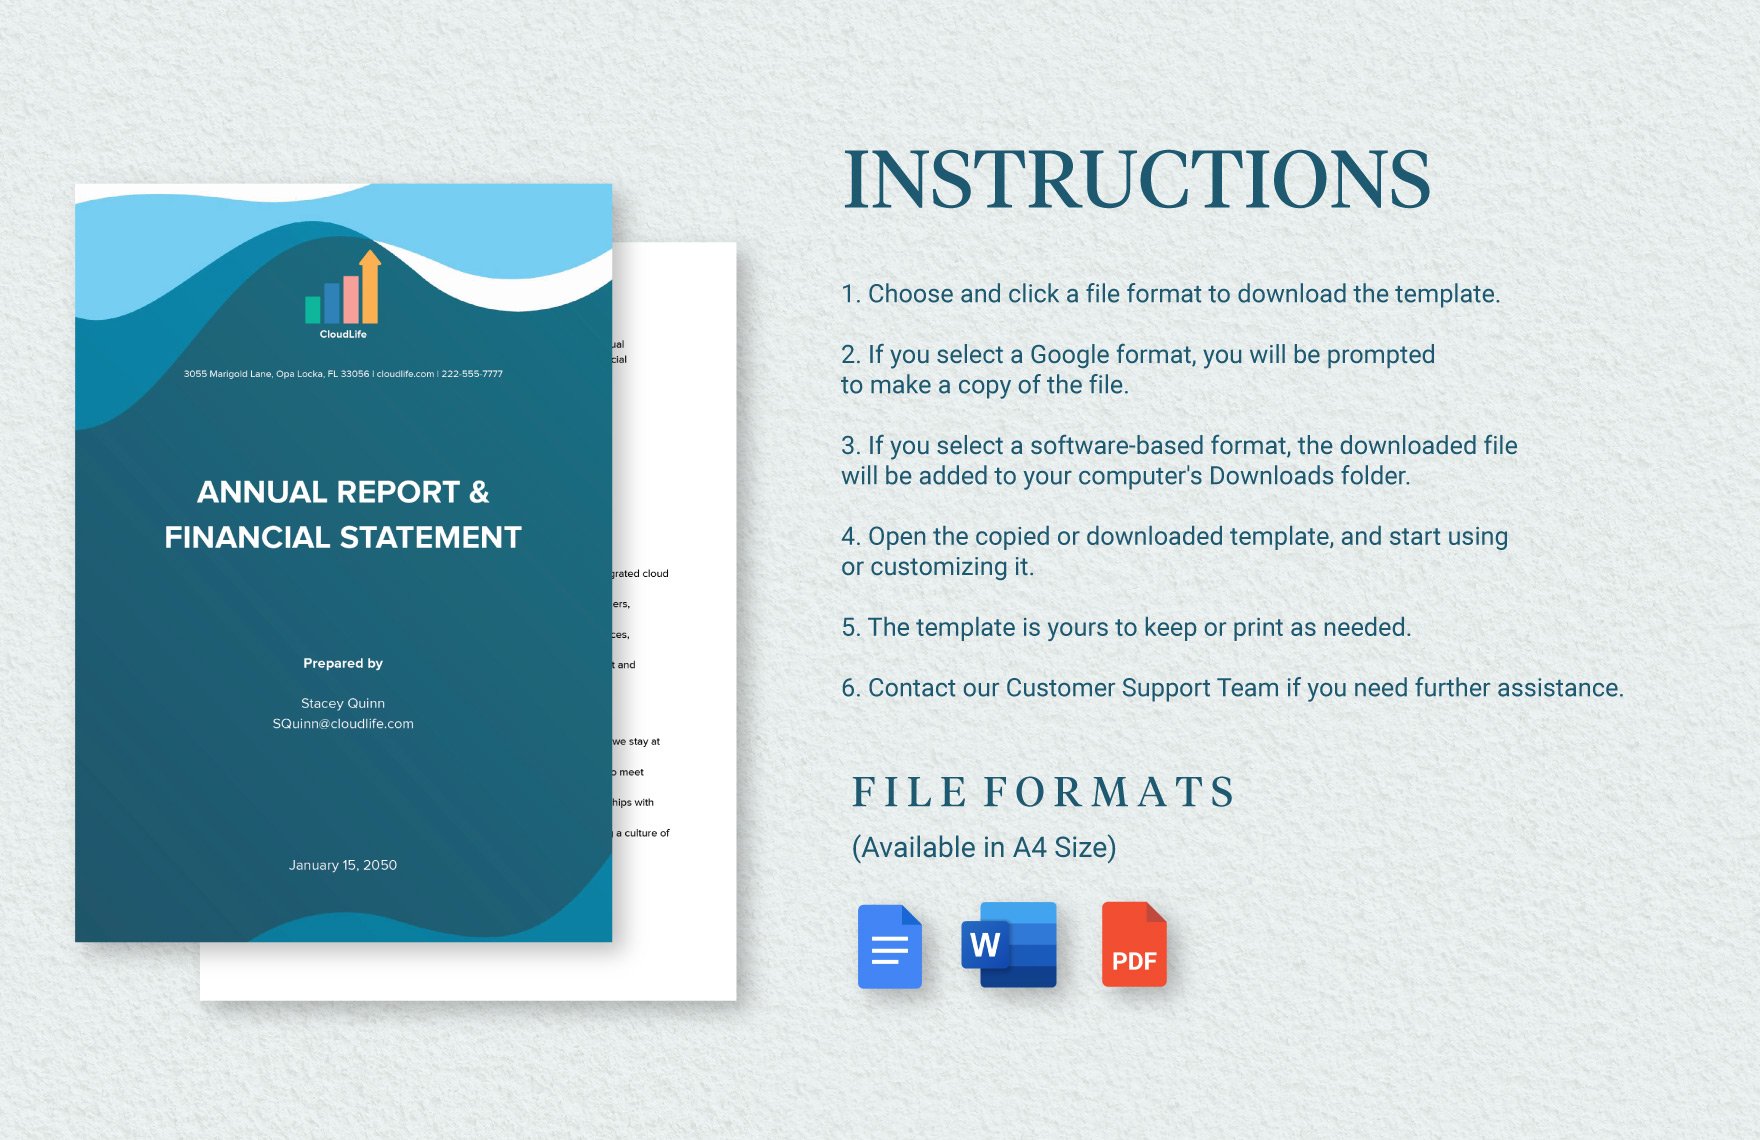 Annual Report & Financial Statement Template